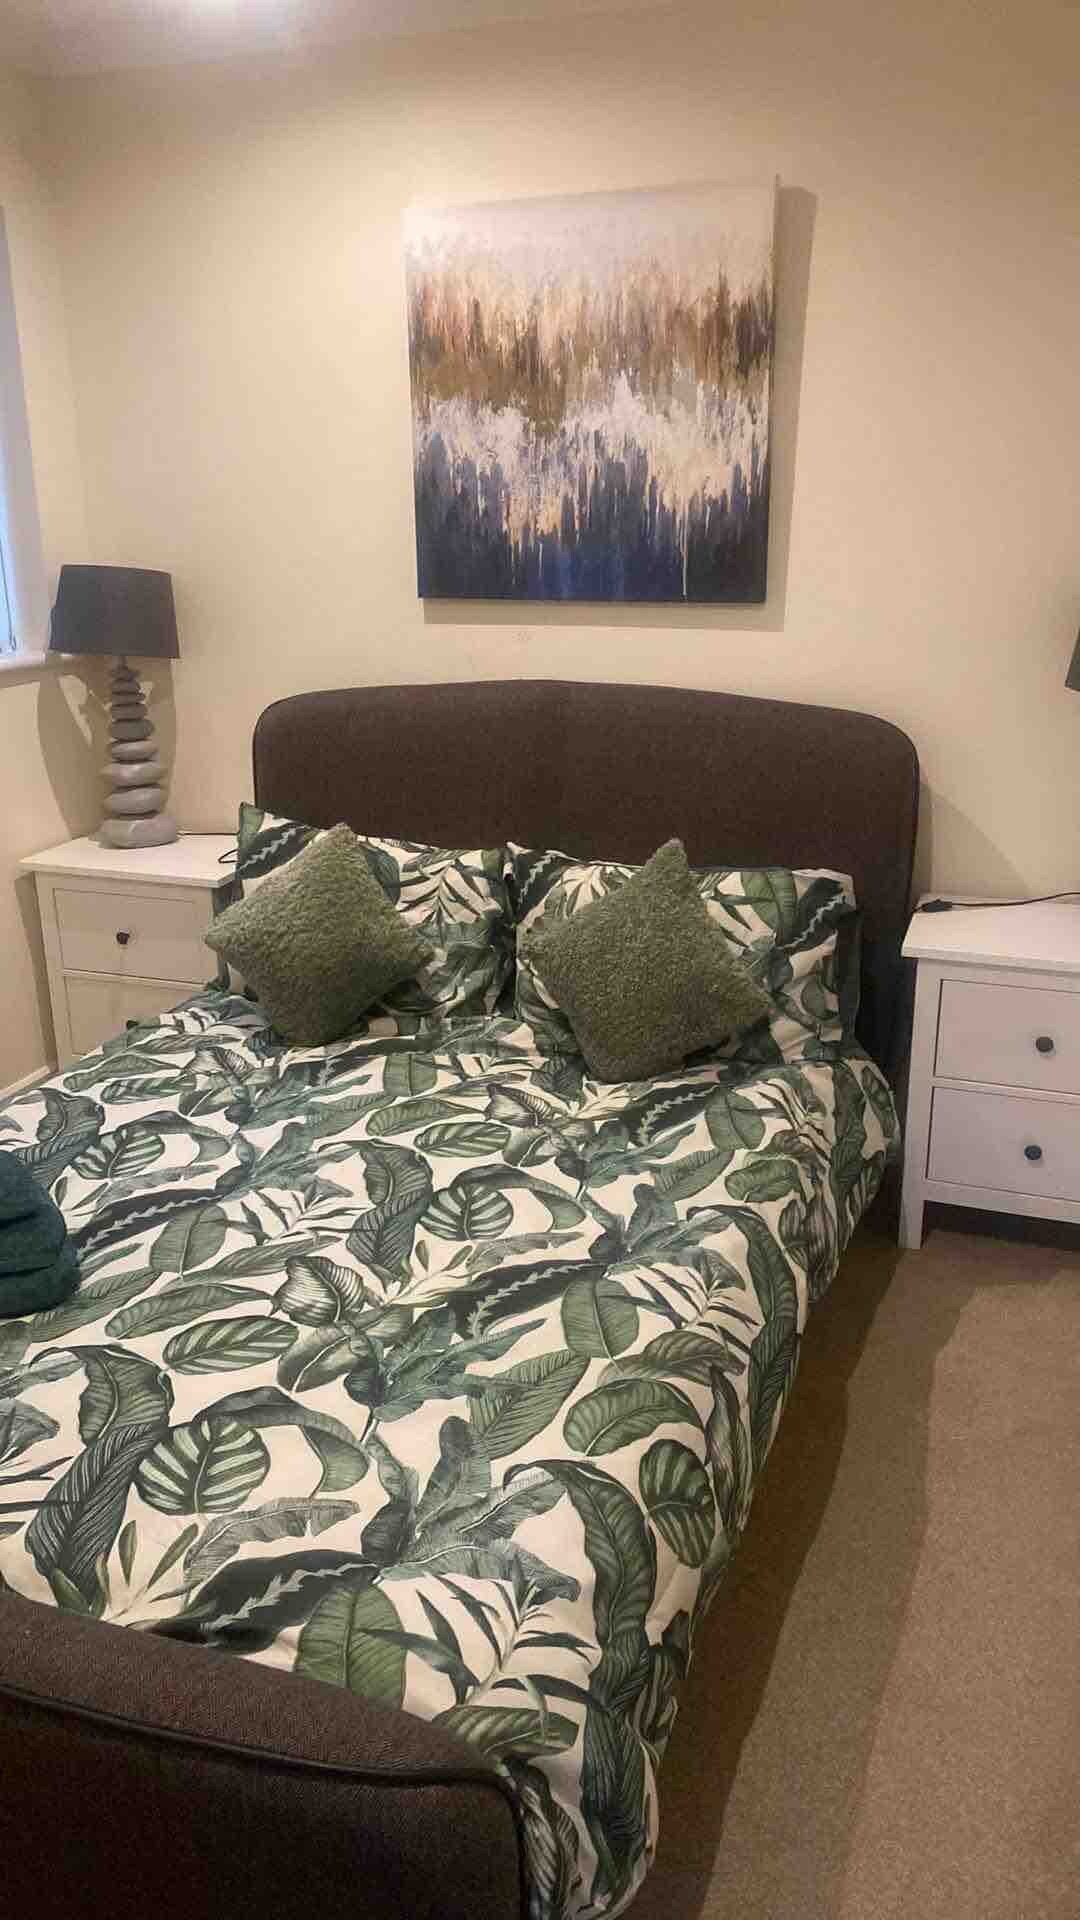 Lovely 2 bed apartment sleeps 5